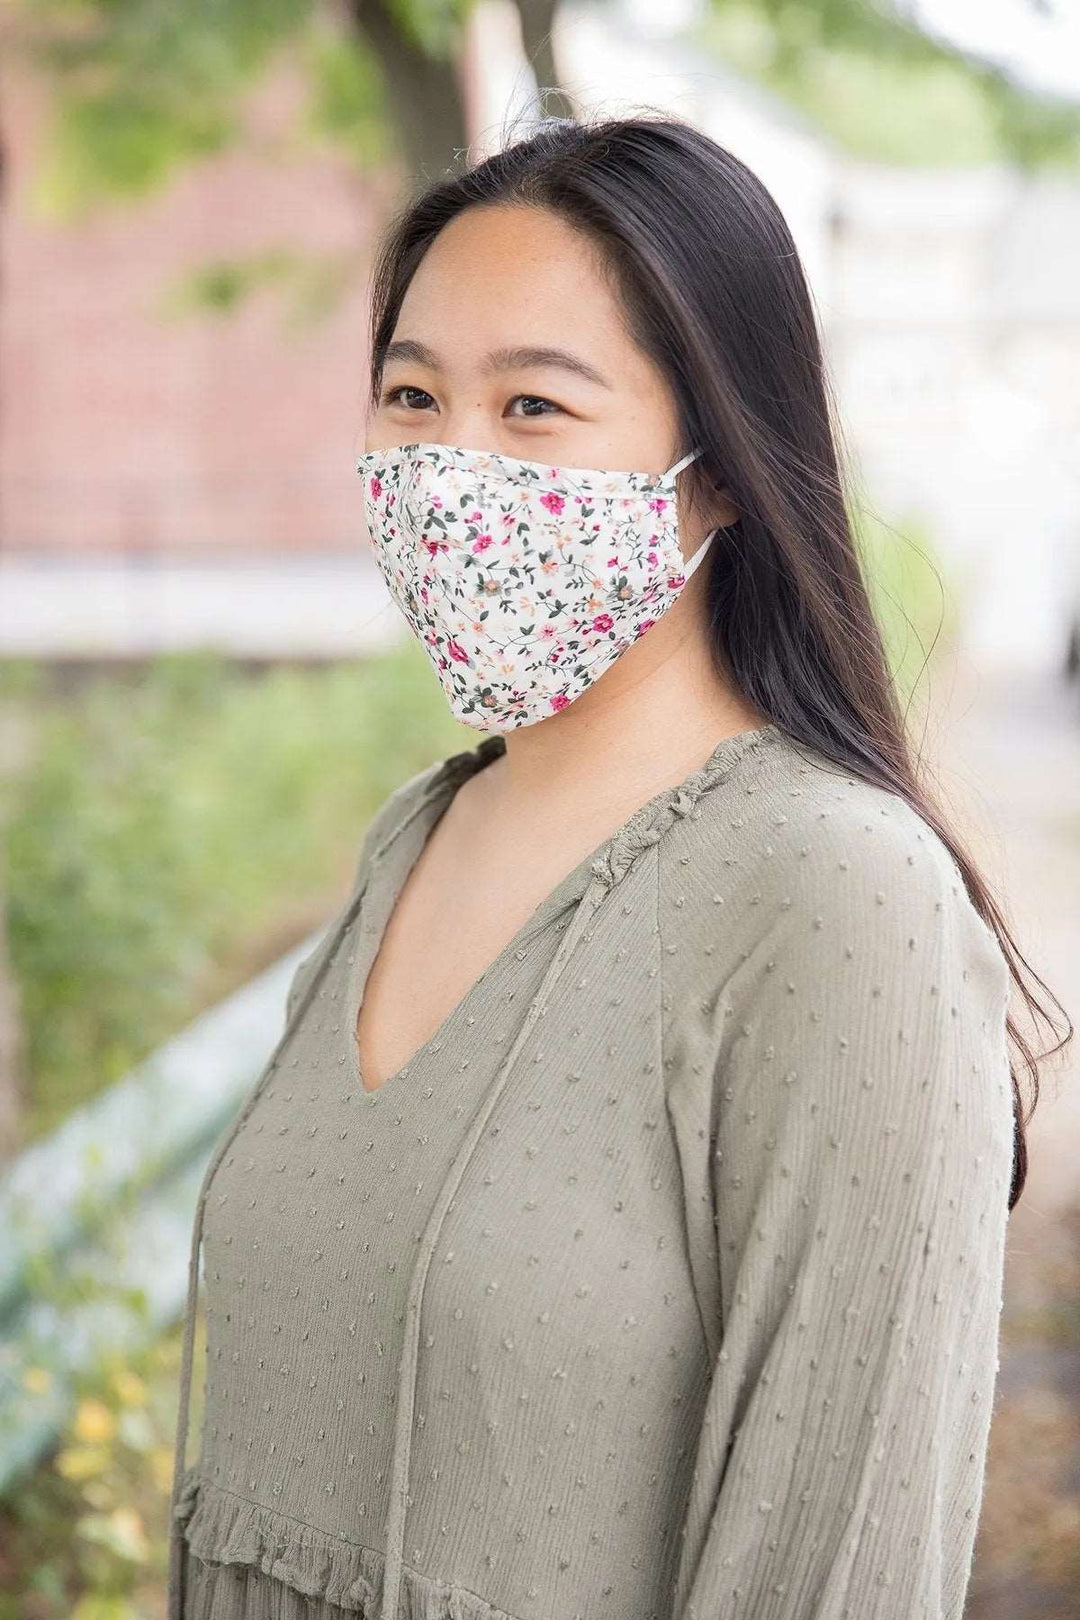 Adjustable Floral Face Mask with Two PM2.5 Filters White